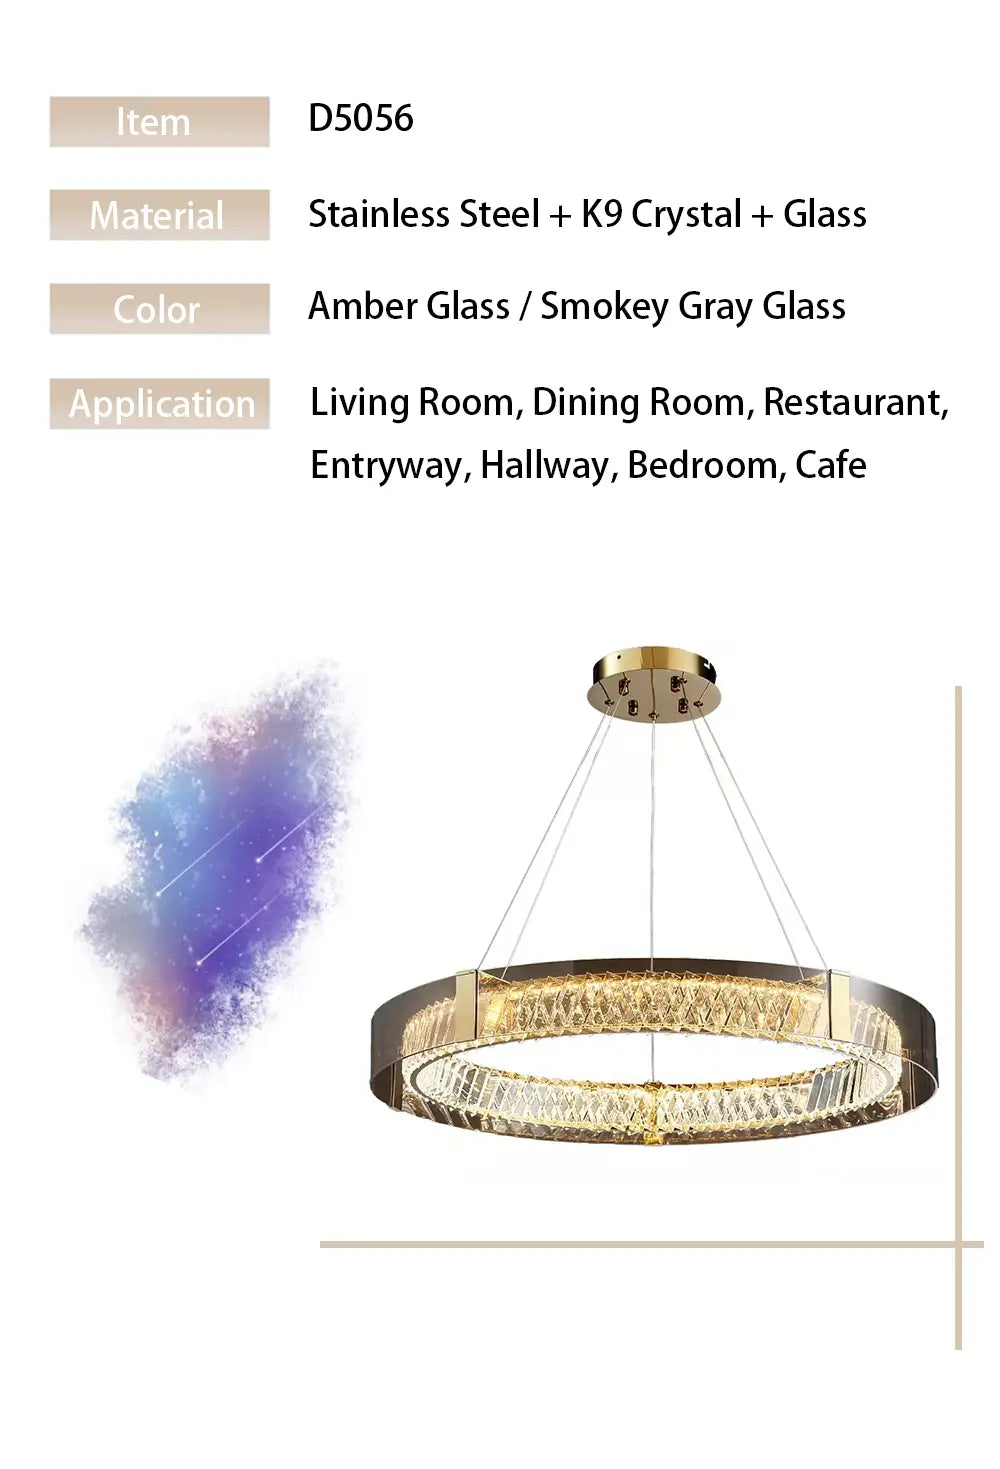 Luxury Dimmable Crystal Ceiling Lights - Modern LED